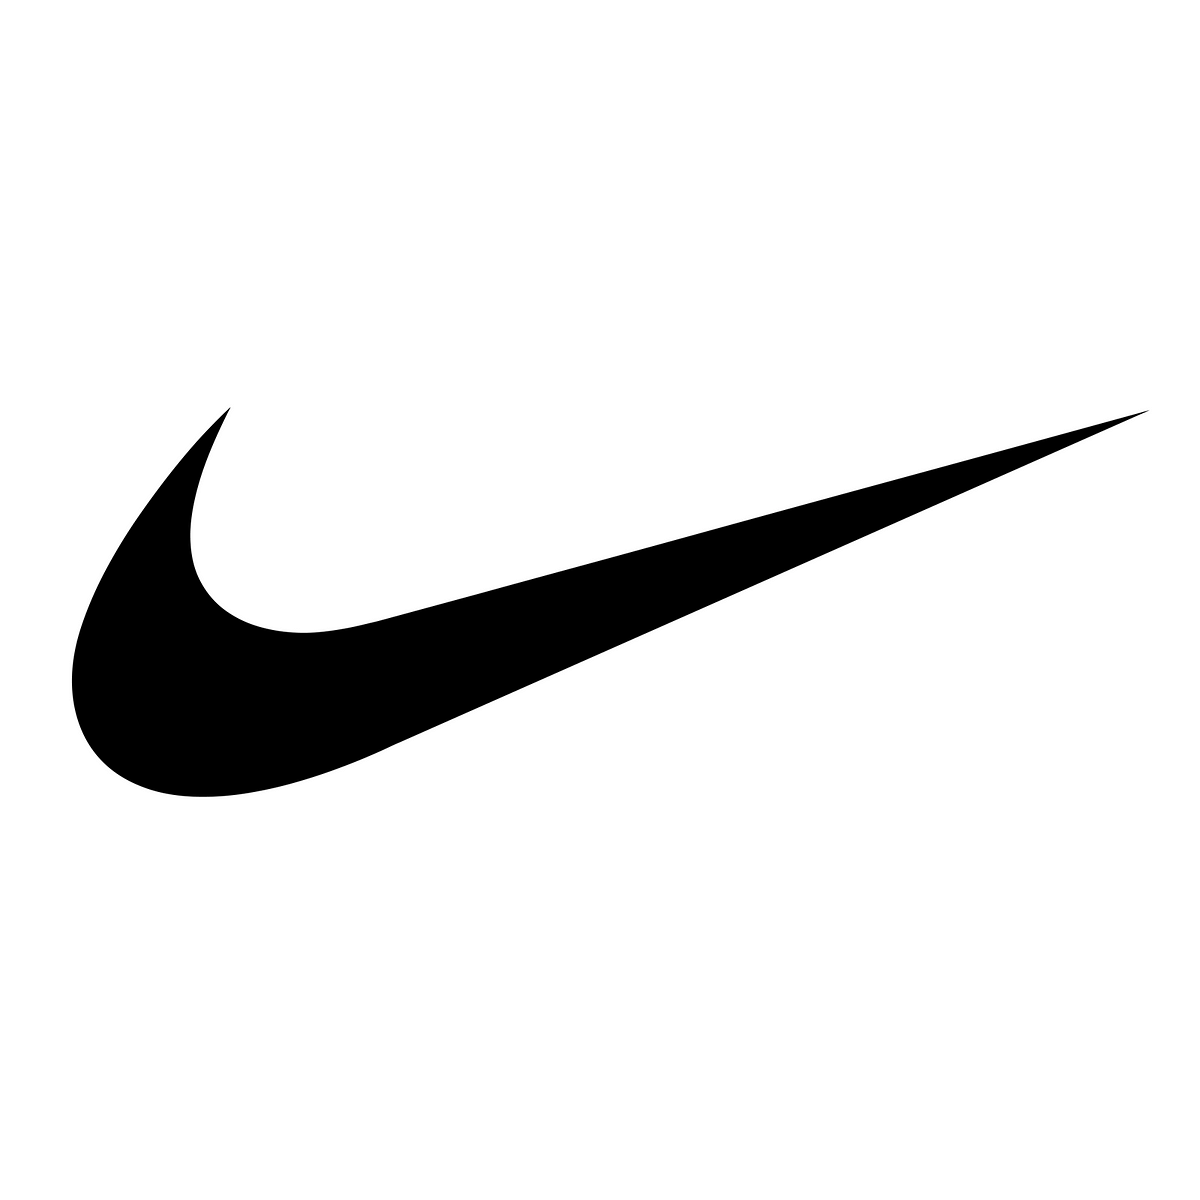 Soltero Mus astronomía How Nike used Brand Equity to become the Best Sports Apparel Brand Ever |  by Mariah Parker | Medium